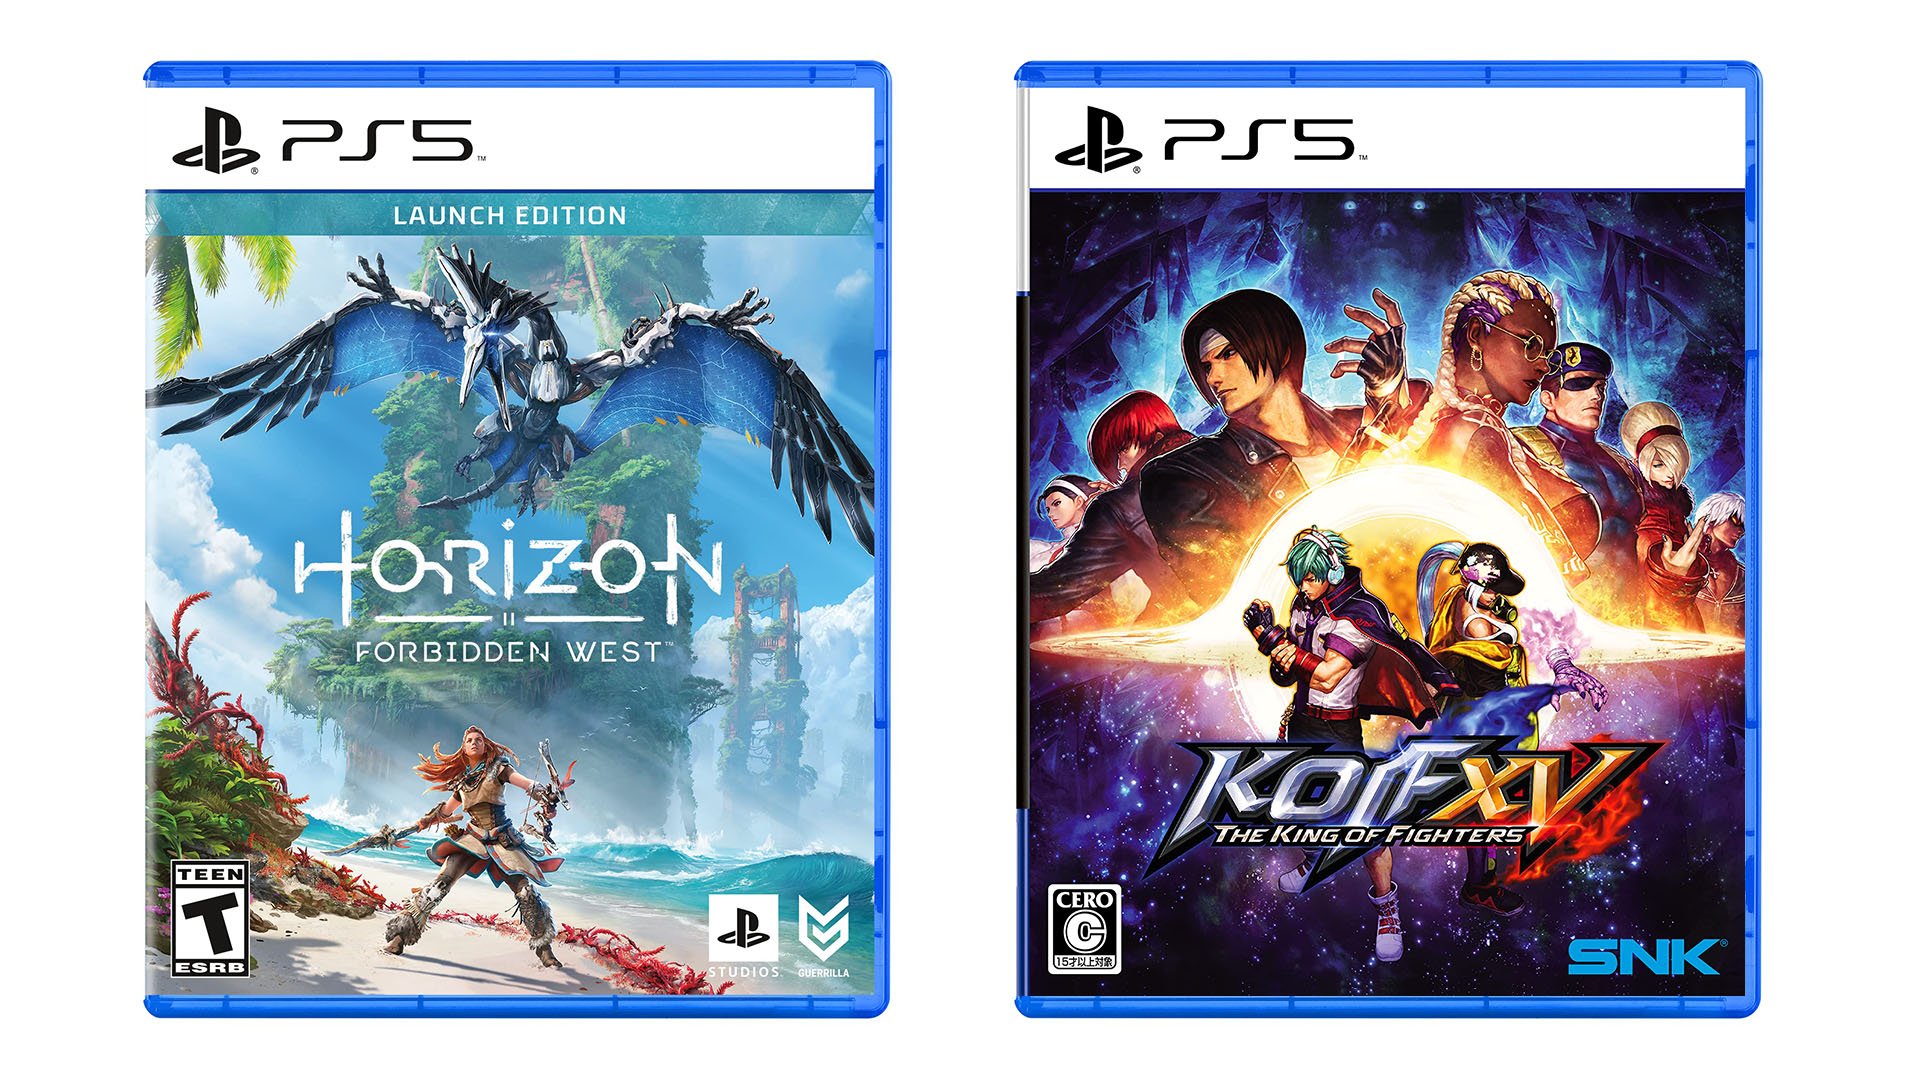 Guerrilla on X: Horizon Forbidden West is now on PlayStation Plus